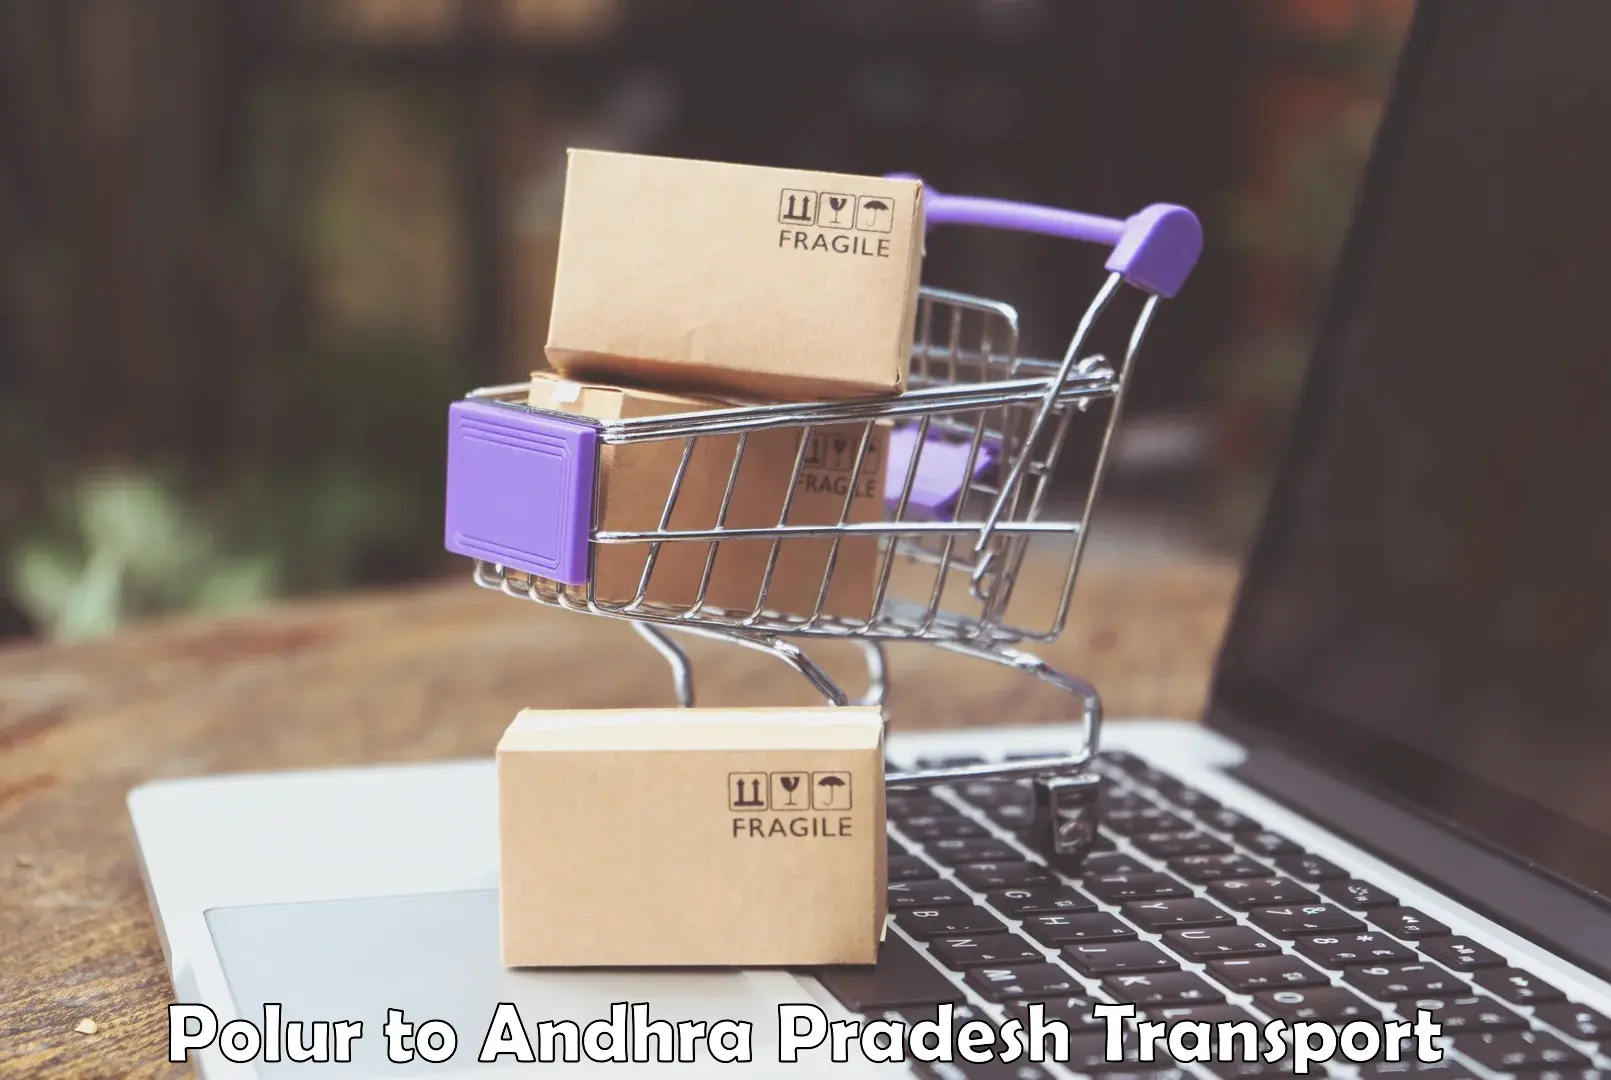 Package delivery services Polur to Velgodu